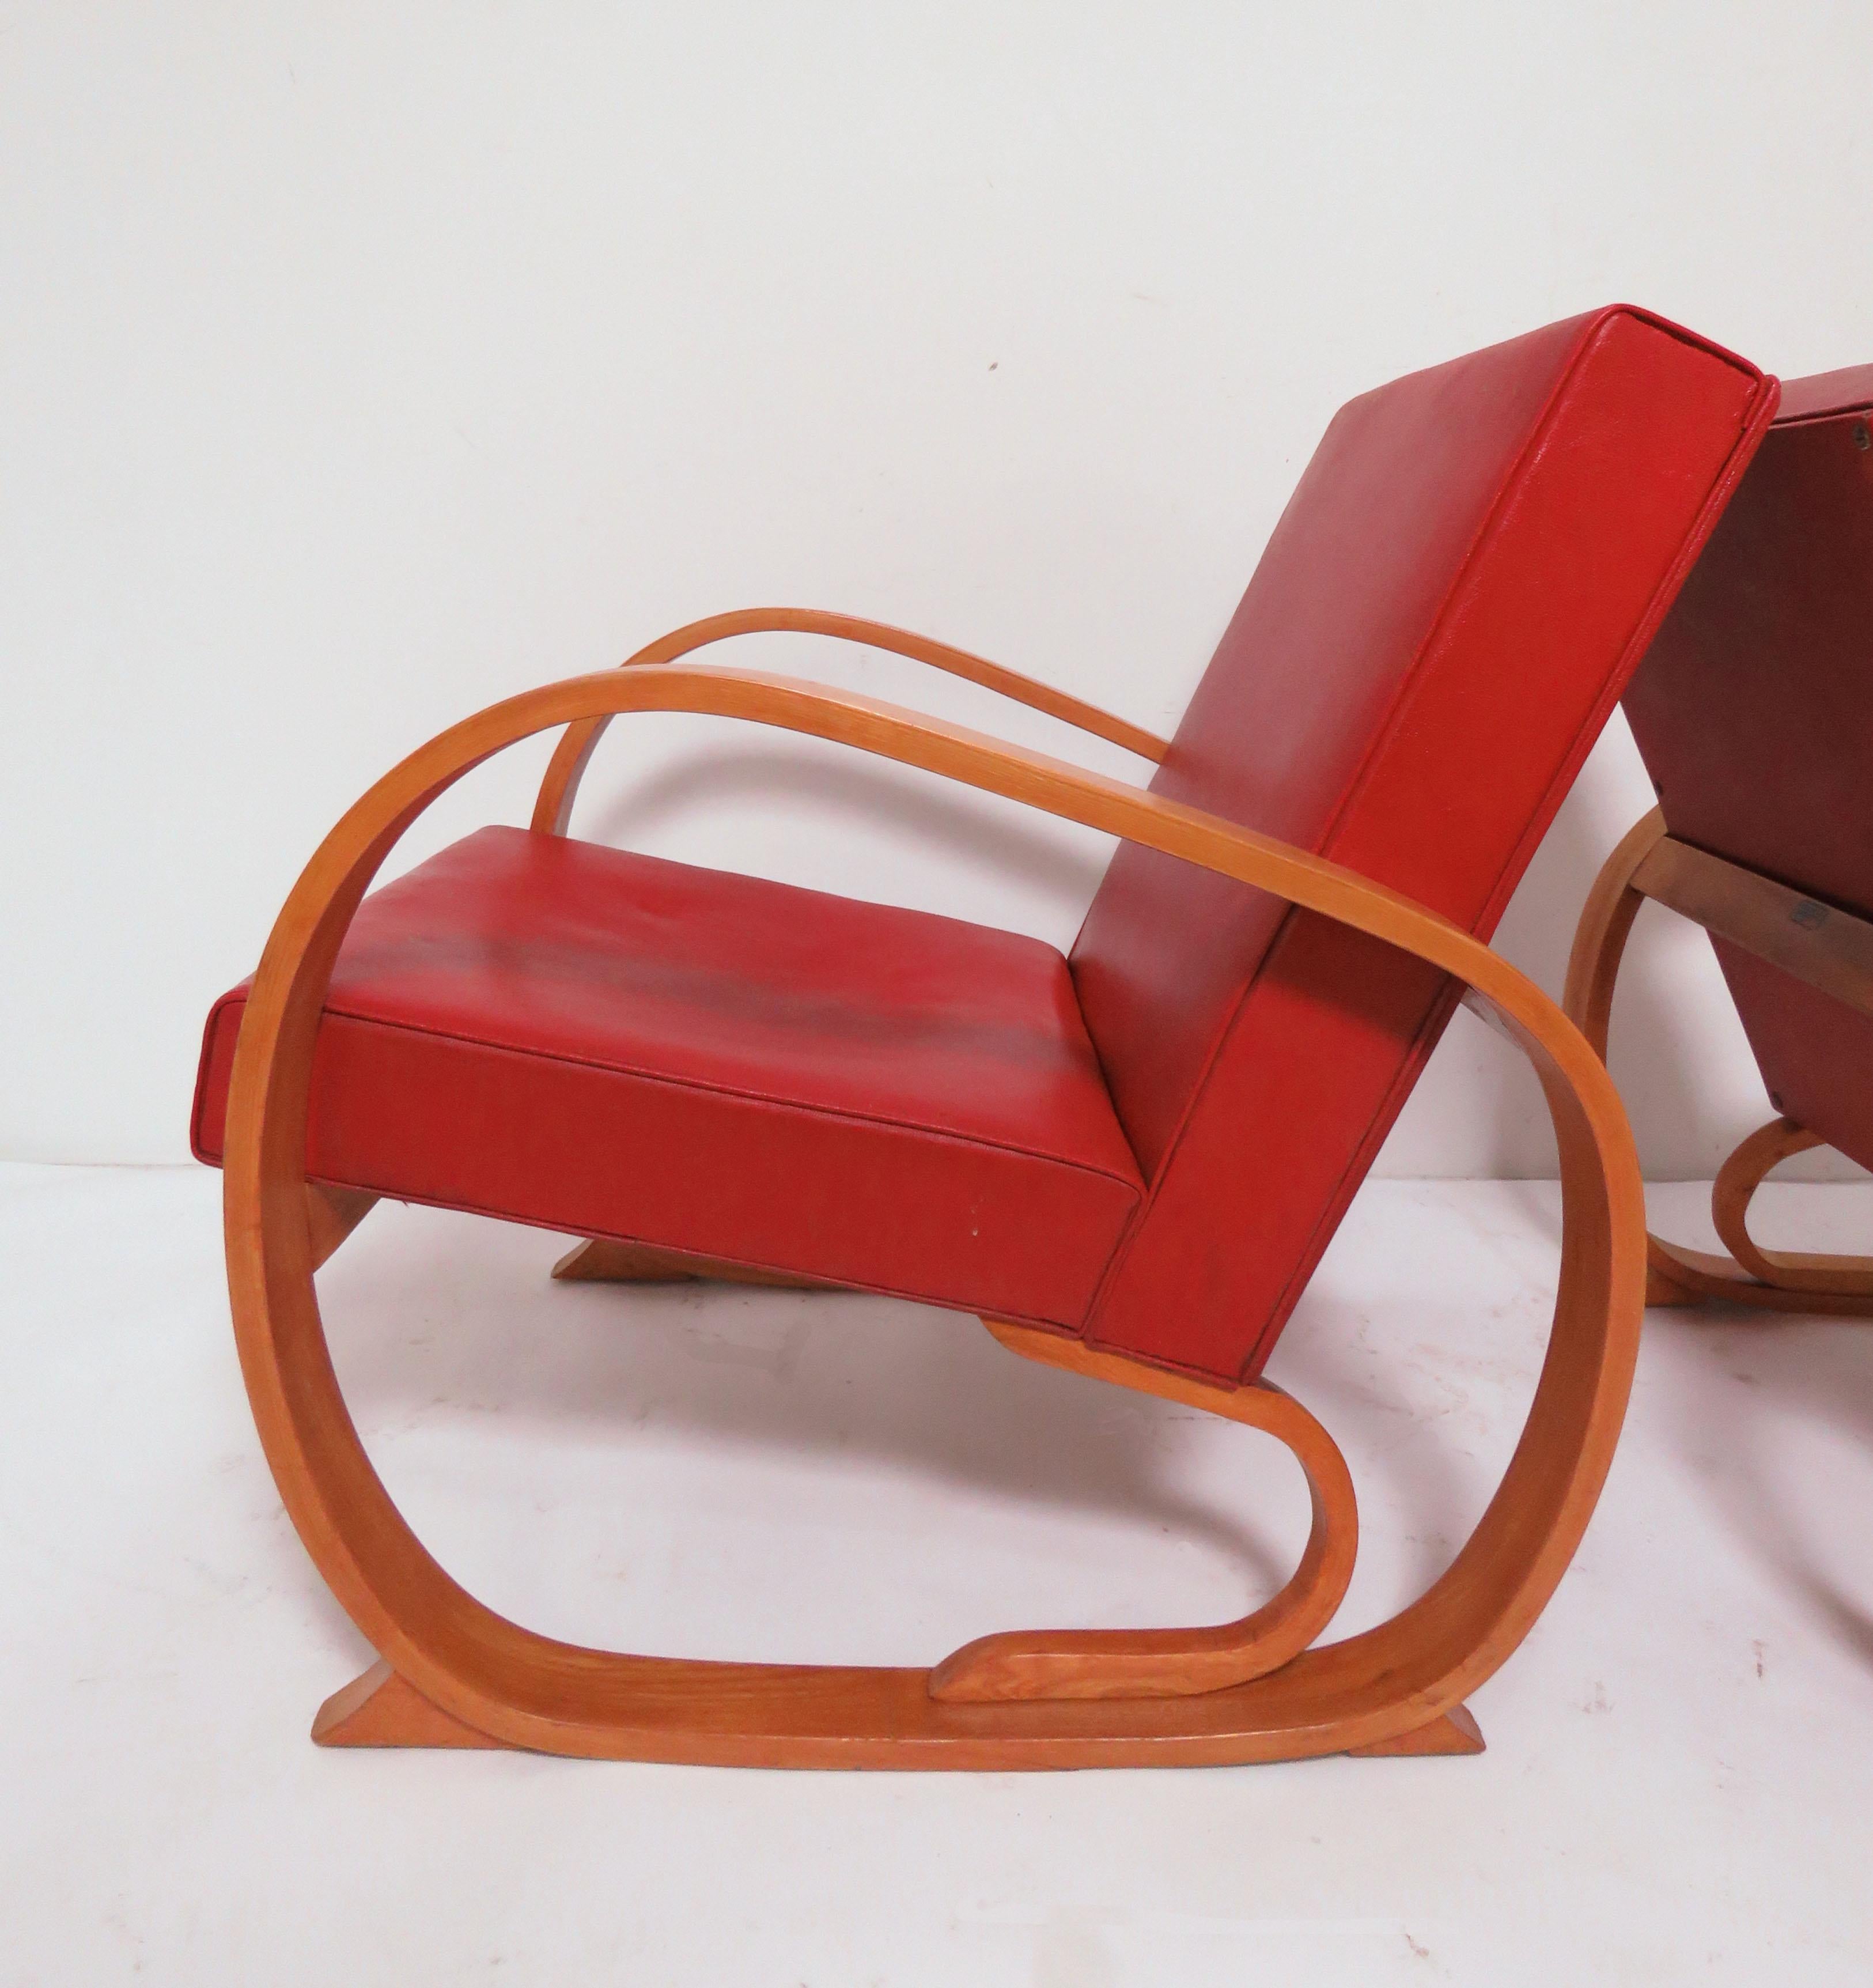 A pair of 1930s Art Deco bentwood club chairs in the manner of Thonet or Alvar Aalto. A rare prewar design styled by inventor Hyman Robert Shampaine for his St. Louis, Mo., medical and hospital equipment company. Measure 25” wide, 30.75” high, 23”